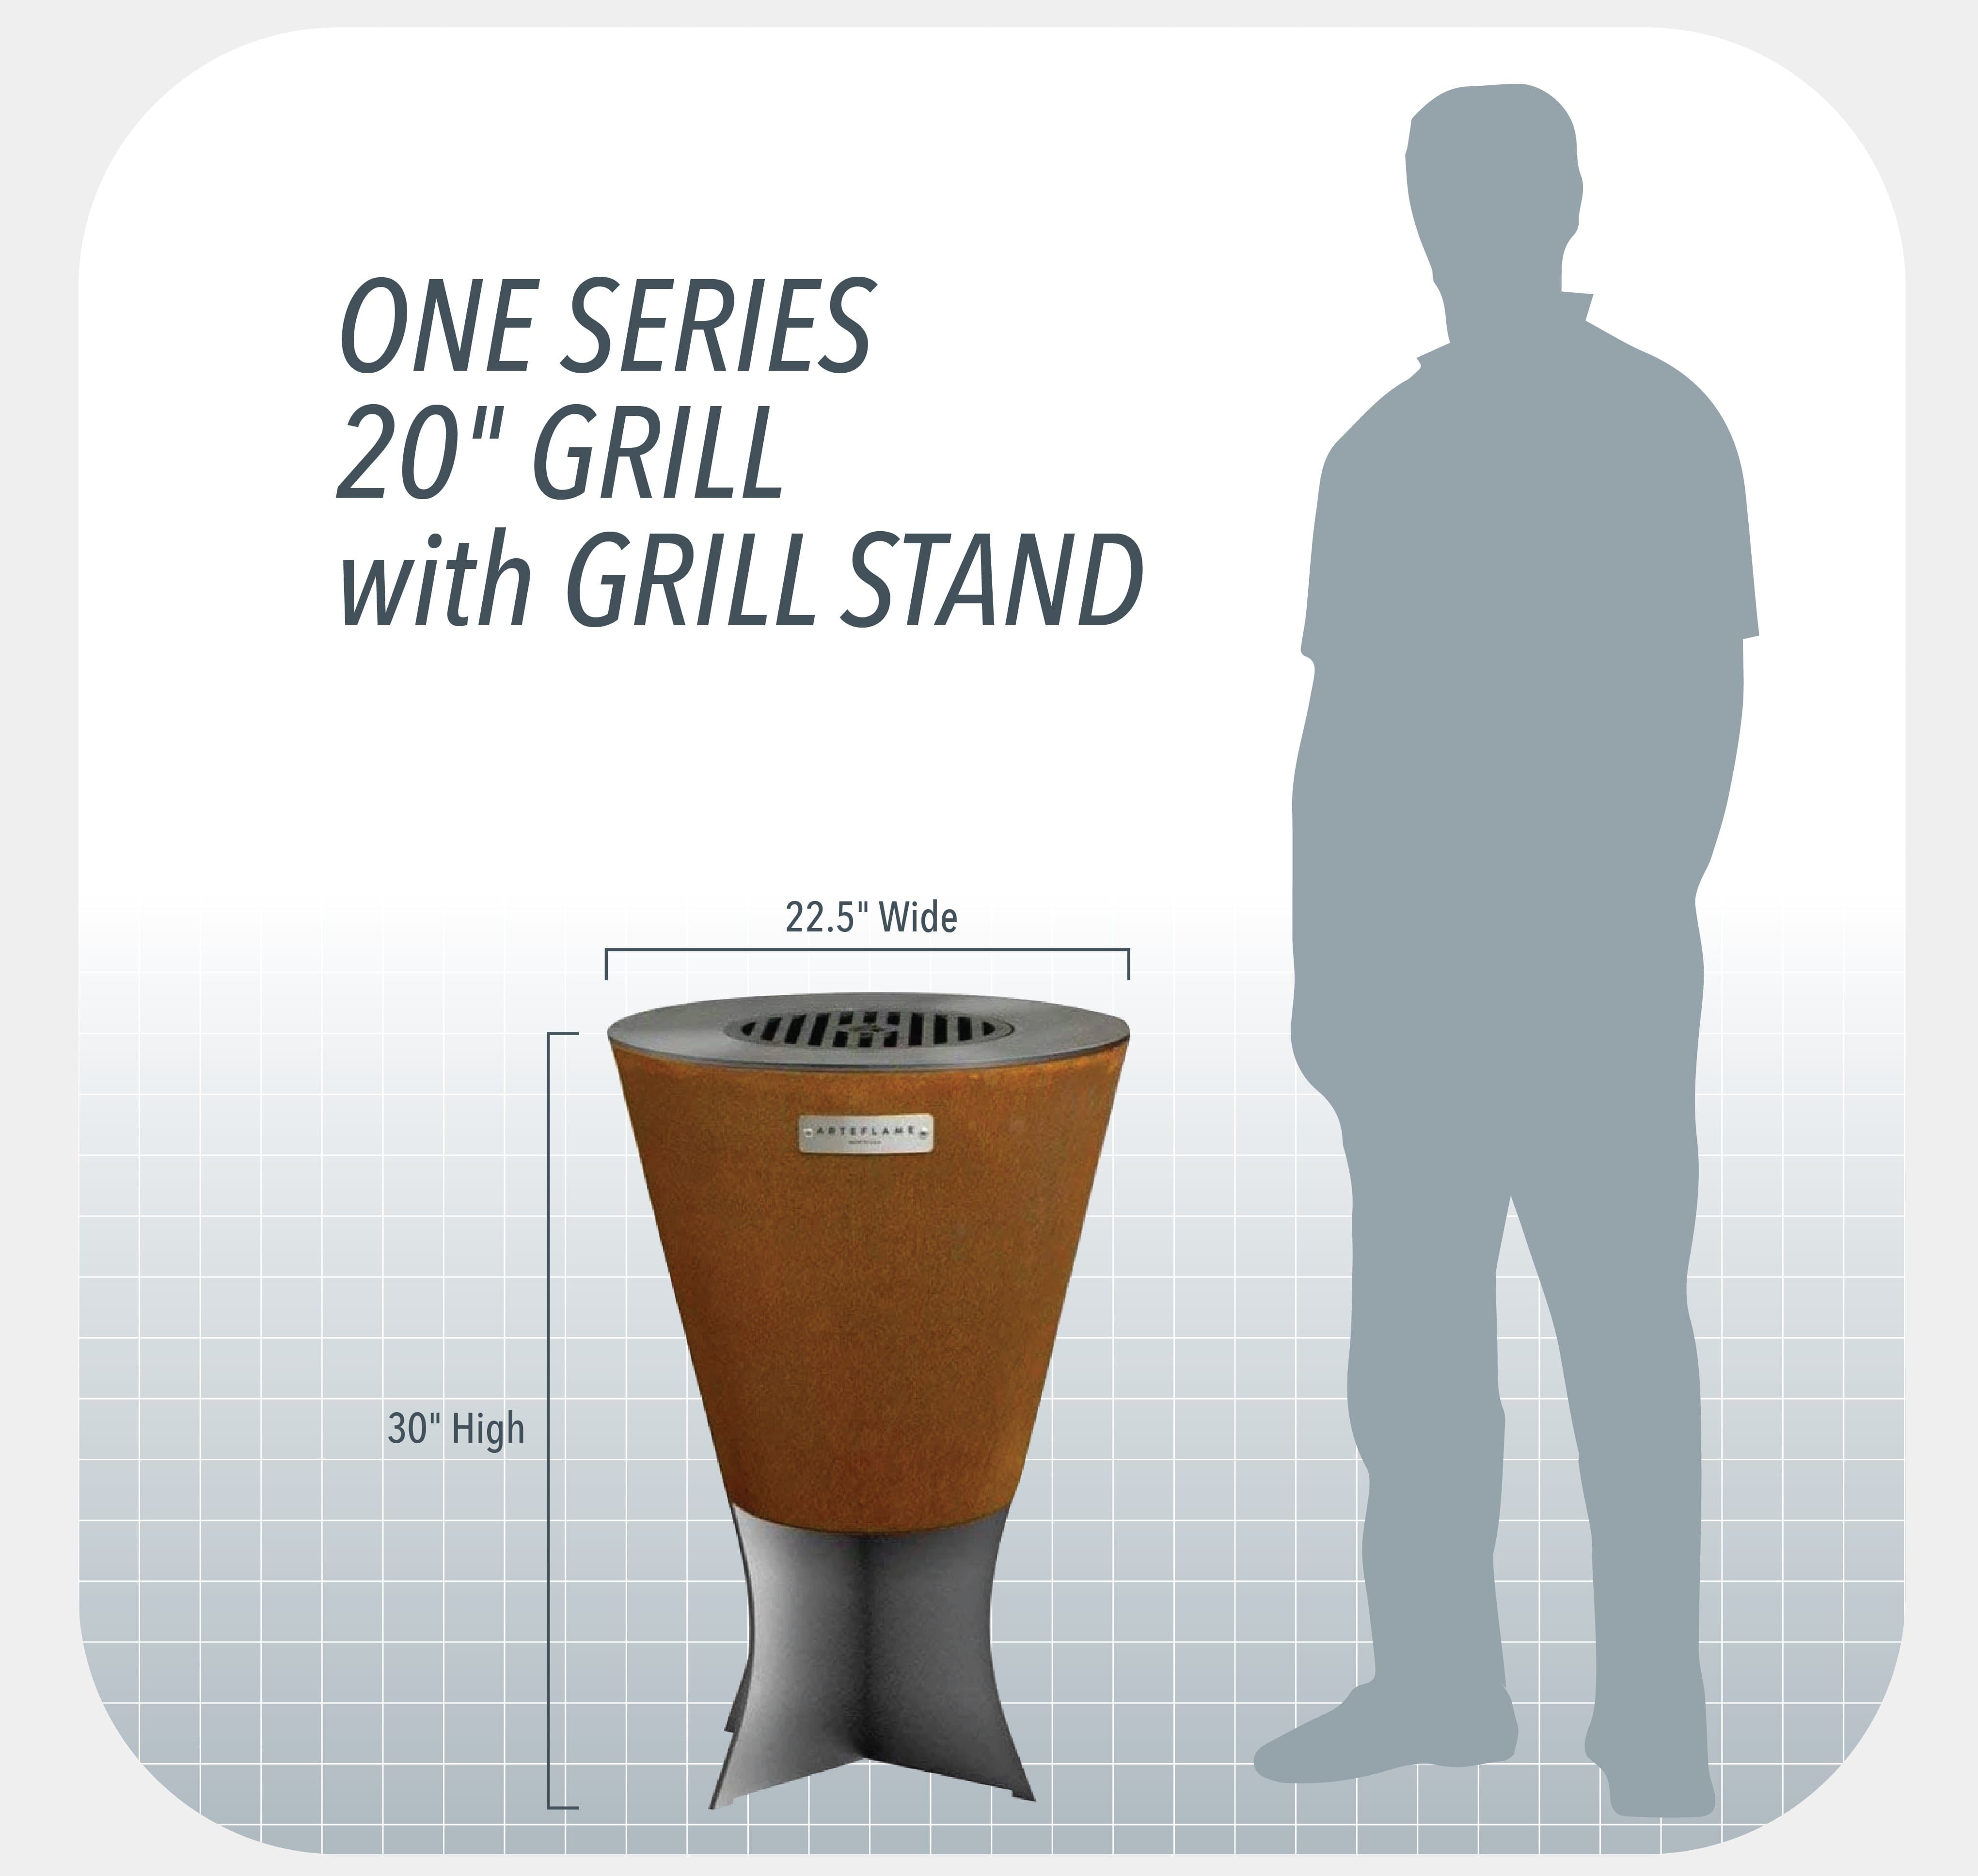 Grill Stand 20" Grill